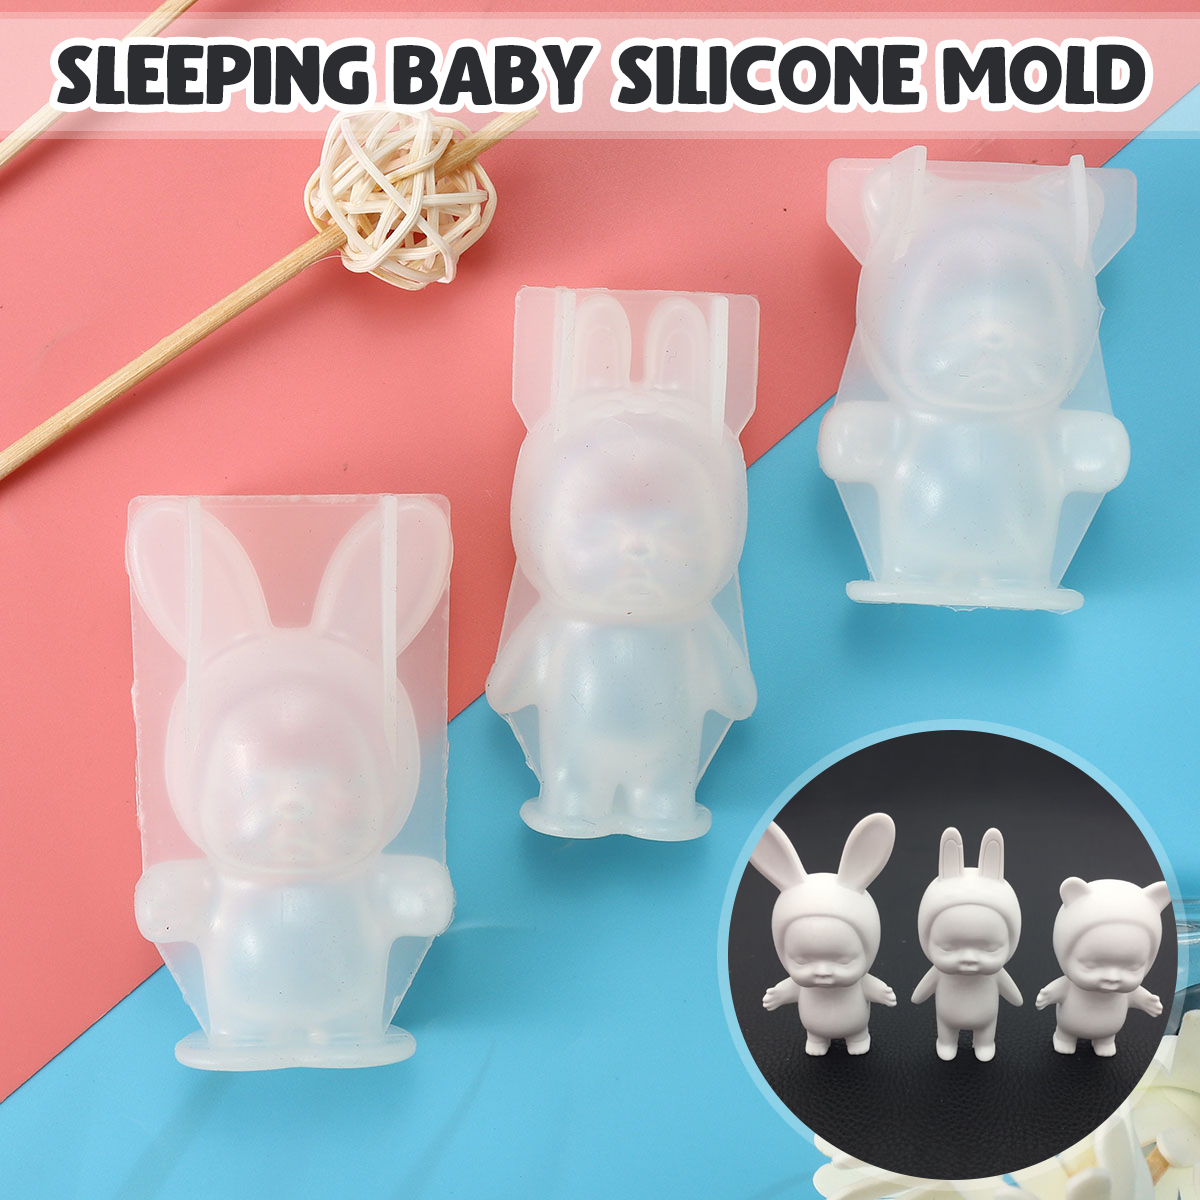 SML-DIY-Silicone-Mold-Sleeping-Baby-Mould-Aromatherapy-Plaster-Storage-Container-1673430-1